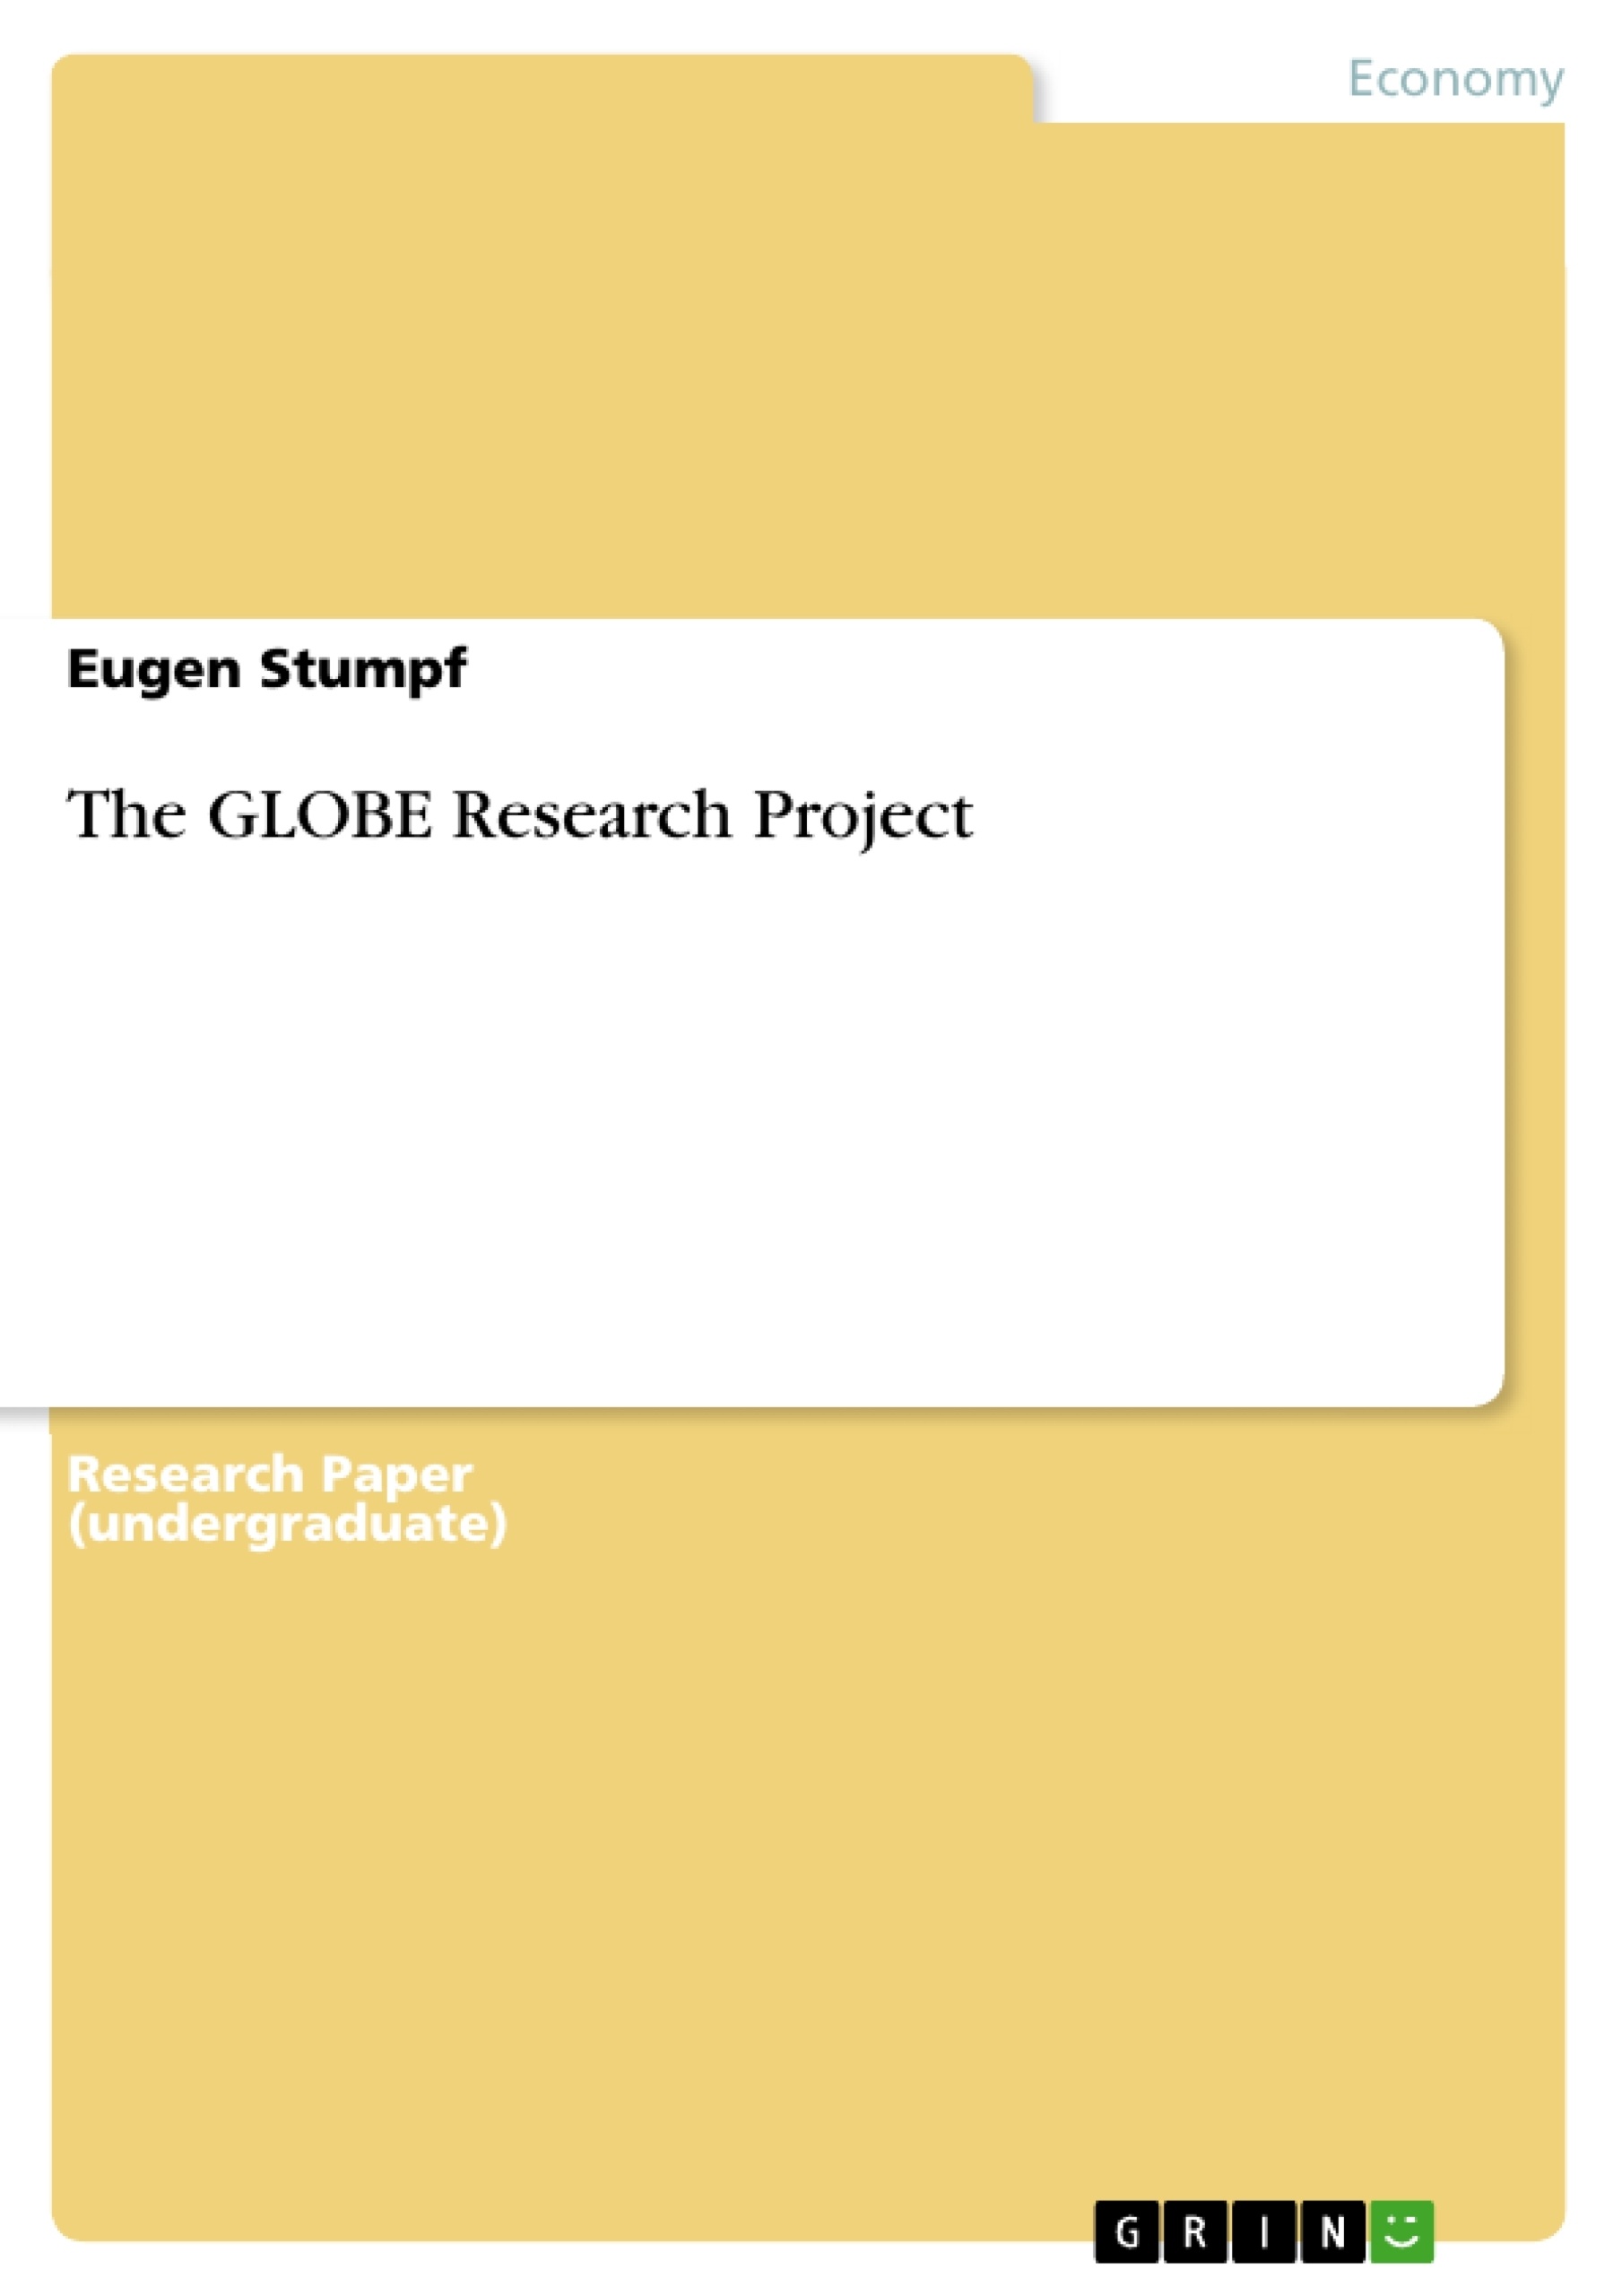 Título: The GLOBE Research Project